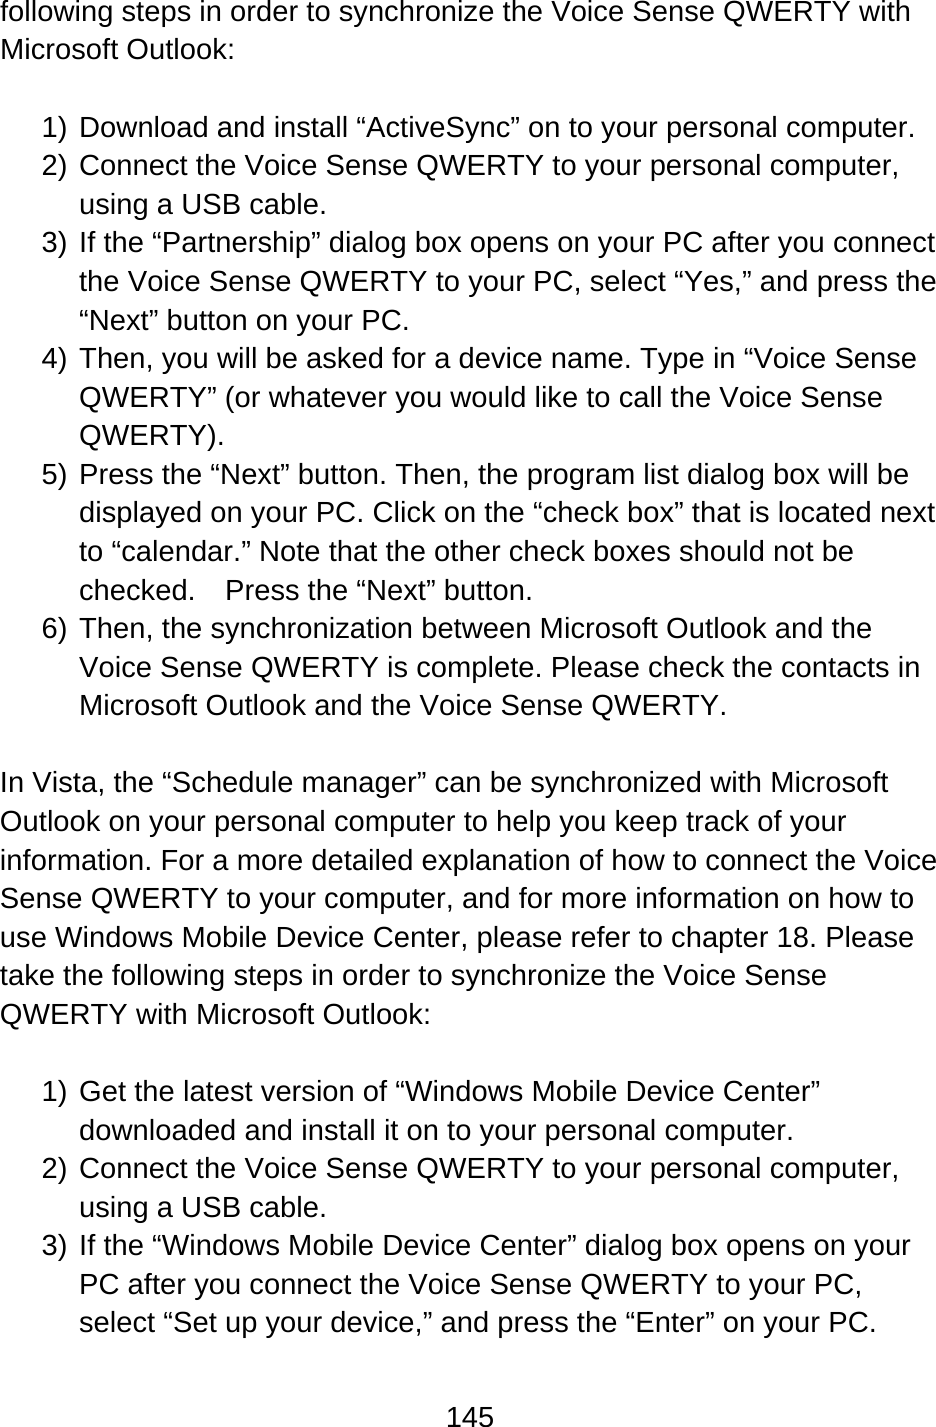 145  following steps in order to synchronize the Voice Sense QWERTY with Microsoft Outlook:  1) Download and install “ActiveSync” on to your personal computer. 2) Connect the Voice Sense QWERTY to your personal computer, using a USB cable. 3) If the “Partnership” dialog box opens on your PC after you connect the Voice Sense QWERTY to your PC, select “Yes,” and press the “Next” button on your PC. 4) Then, you will be asked for a device name. Type in “Voice Sense QWERTY” (or whatever you would like to call the Voice Sense QWERTY). 5) Press the “Next” button. Then, the program list dialog box will be displayed on your PC. Click on the “check box” that is located next to “calendar.” Note that the other check boxes should not be checked.  Press the “Next” button. 6) Then, the synchronization between Microsoft Outlook and the Voice Sense QWERTY is complete. Please check the contacts in Microsoft Outlook and the Voice Sense QWERTY.  In Vista, the “Schedule manager” can be synchronized with Microsoft Outlook on your personal computer to help you keep track of your information. For a more detailed explanation of how to connect the Voice Sense QWERTY to your computer, and for more information on how to use Windows Mobile Device Center, please refer to chapter 18. Please take the following steps in order to synchronize the Voice Sense QWERTY with Microsoft Outlook:  1) Get the latest version of “Windows Mobile Device Center” downloaded and install it on to your personal computer. 2) Connect the Voice Sense QWERTY to your personal computer, using a USB cable. 3) If the “Windows Mobile Device Center” dialog box opens on your PC after you connect the Voice Sense QWERTY to your PC, select “Set up your device,” and press the “Enter” on your PC. 